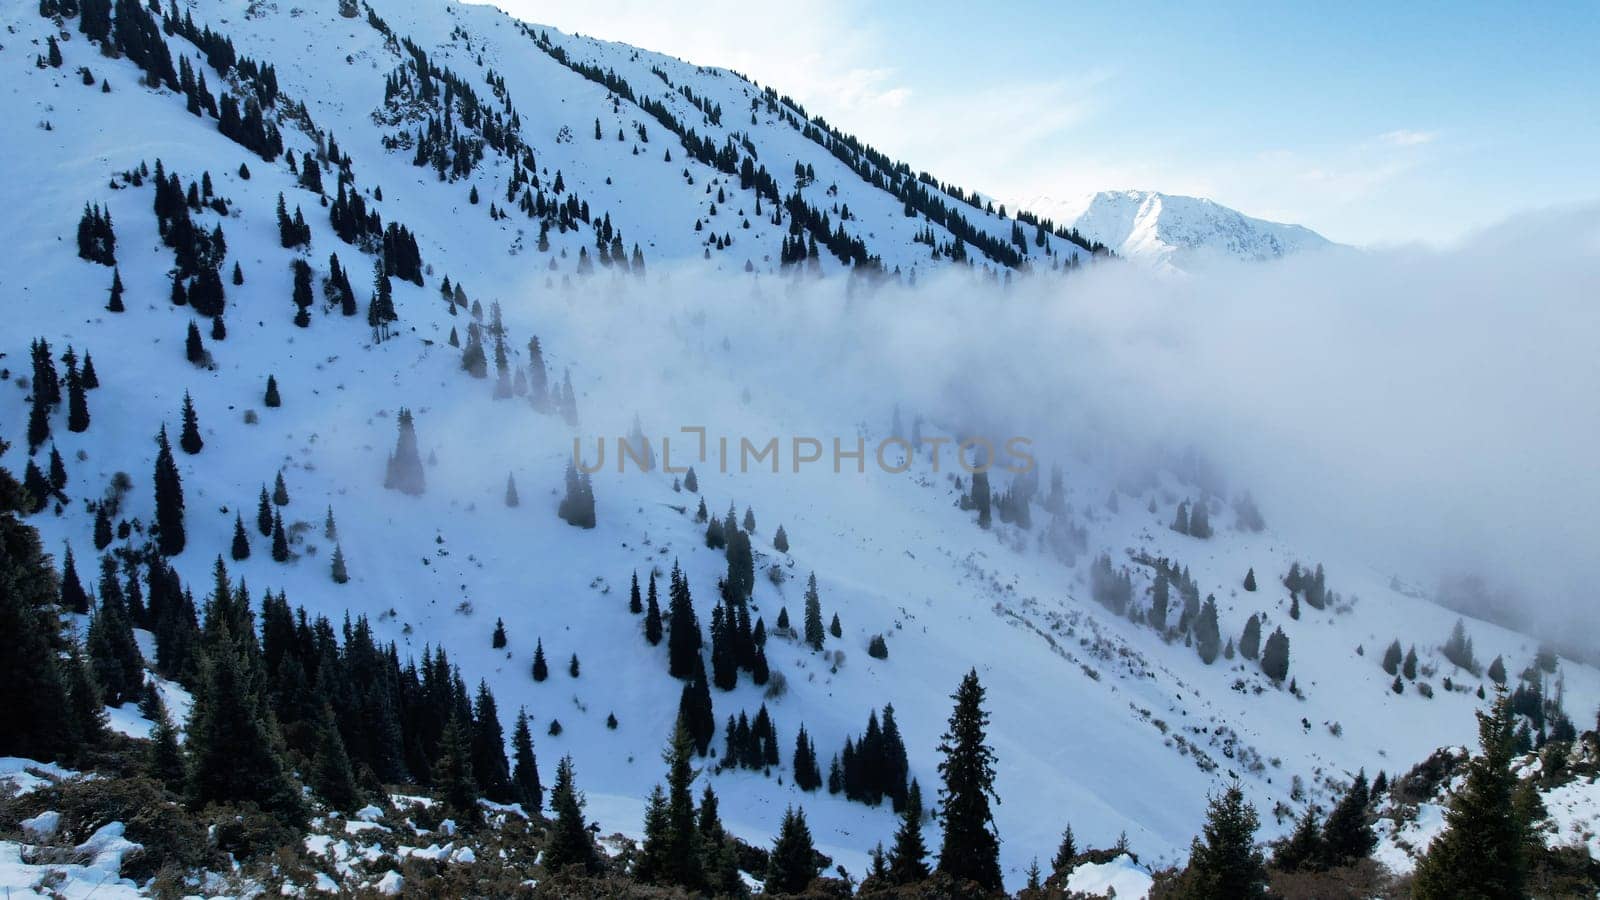 White cumulus clouds in snowy mountains in winter. The rays of the sun fall on part of the clouds, a shadow comes from the peak. Blue sky. Coniferous fir trees grow on the hills. Tourists are walking